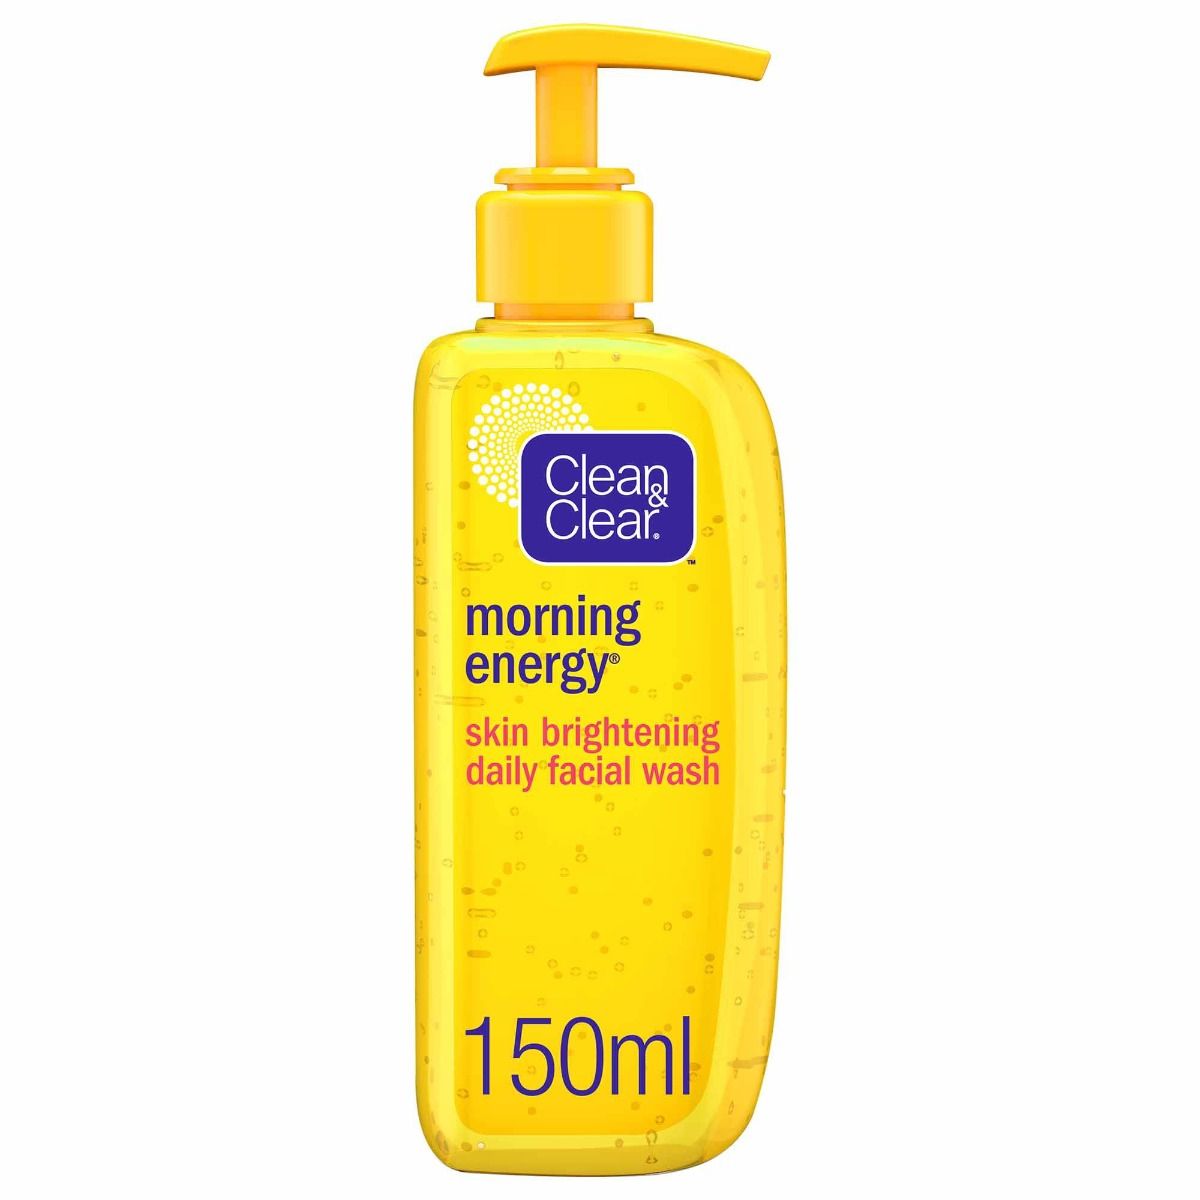 Clean & Clear Morning Energy Skin Brightening Daily Facial Wash, Oil Free, 150mlClean & Clear Morning Energy Skin Brightening Daily Facial Wash, Oil Free, 150ml